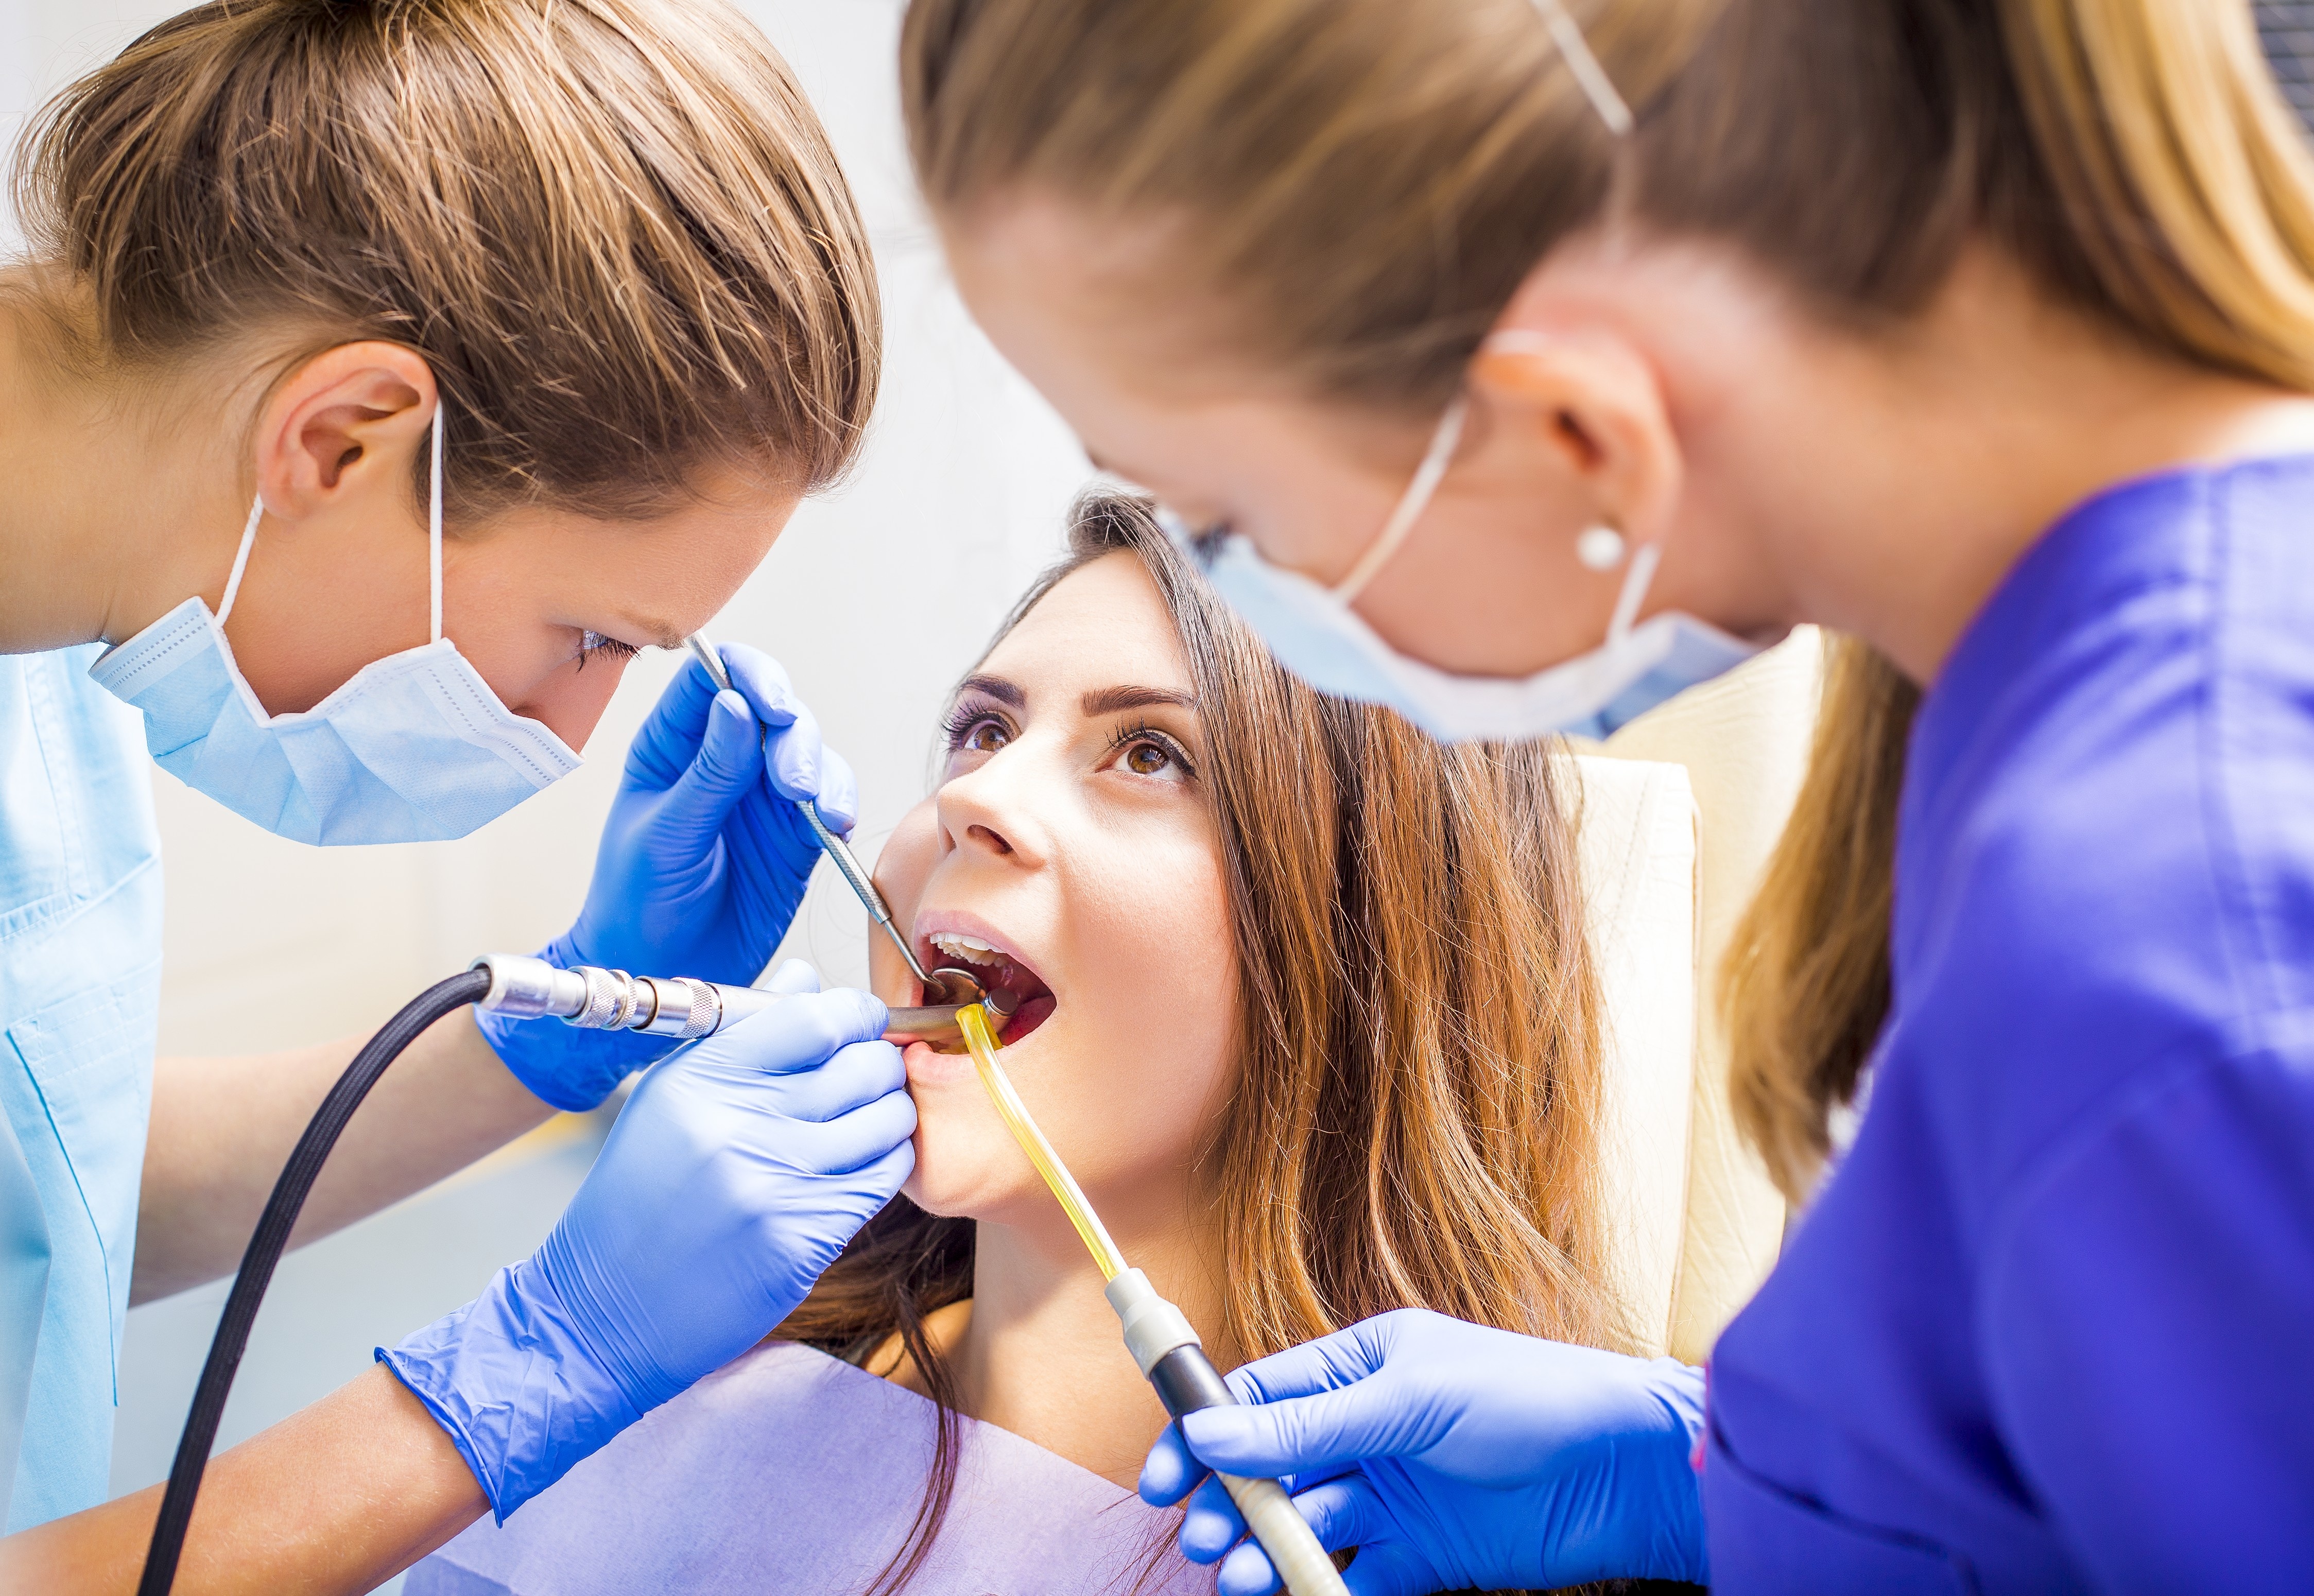 Dental assistant jobs in new haven ct